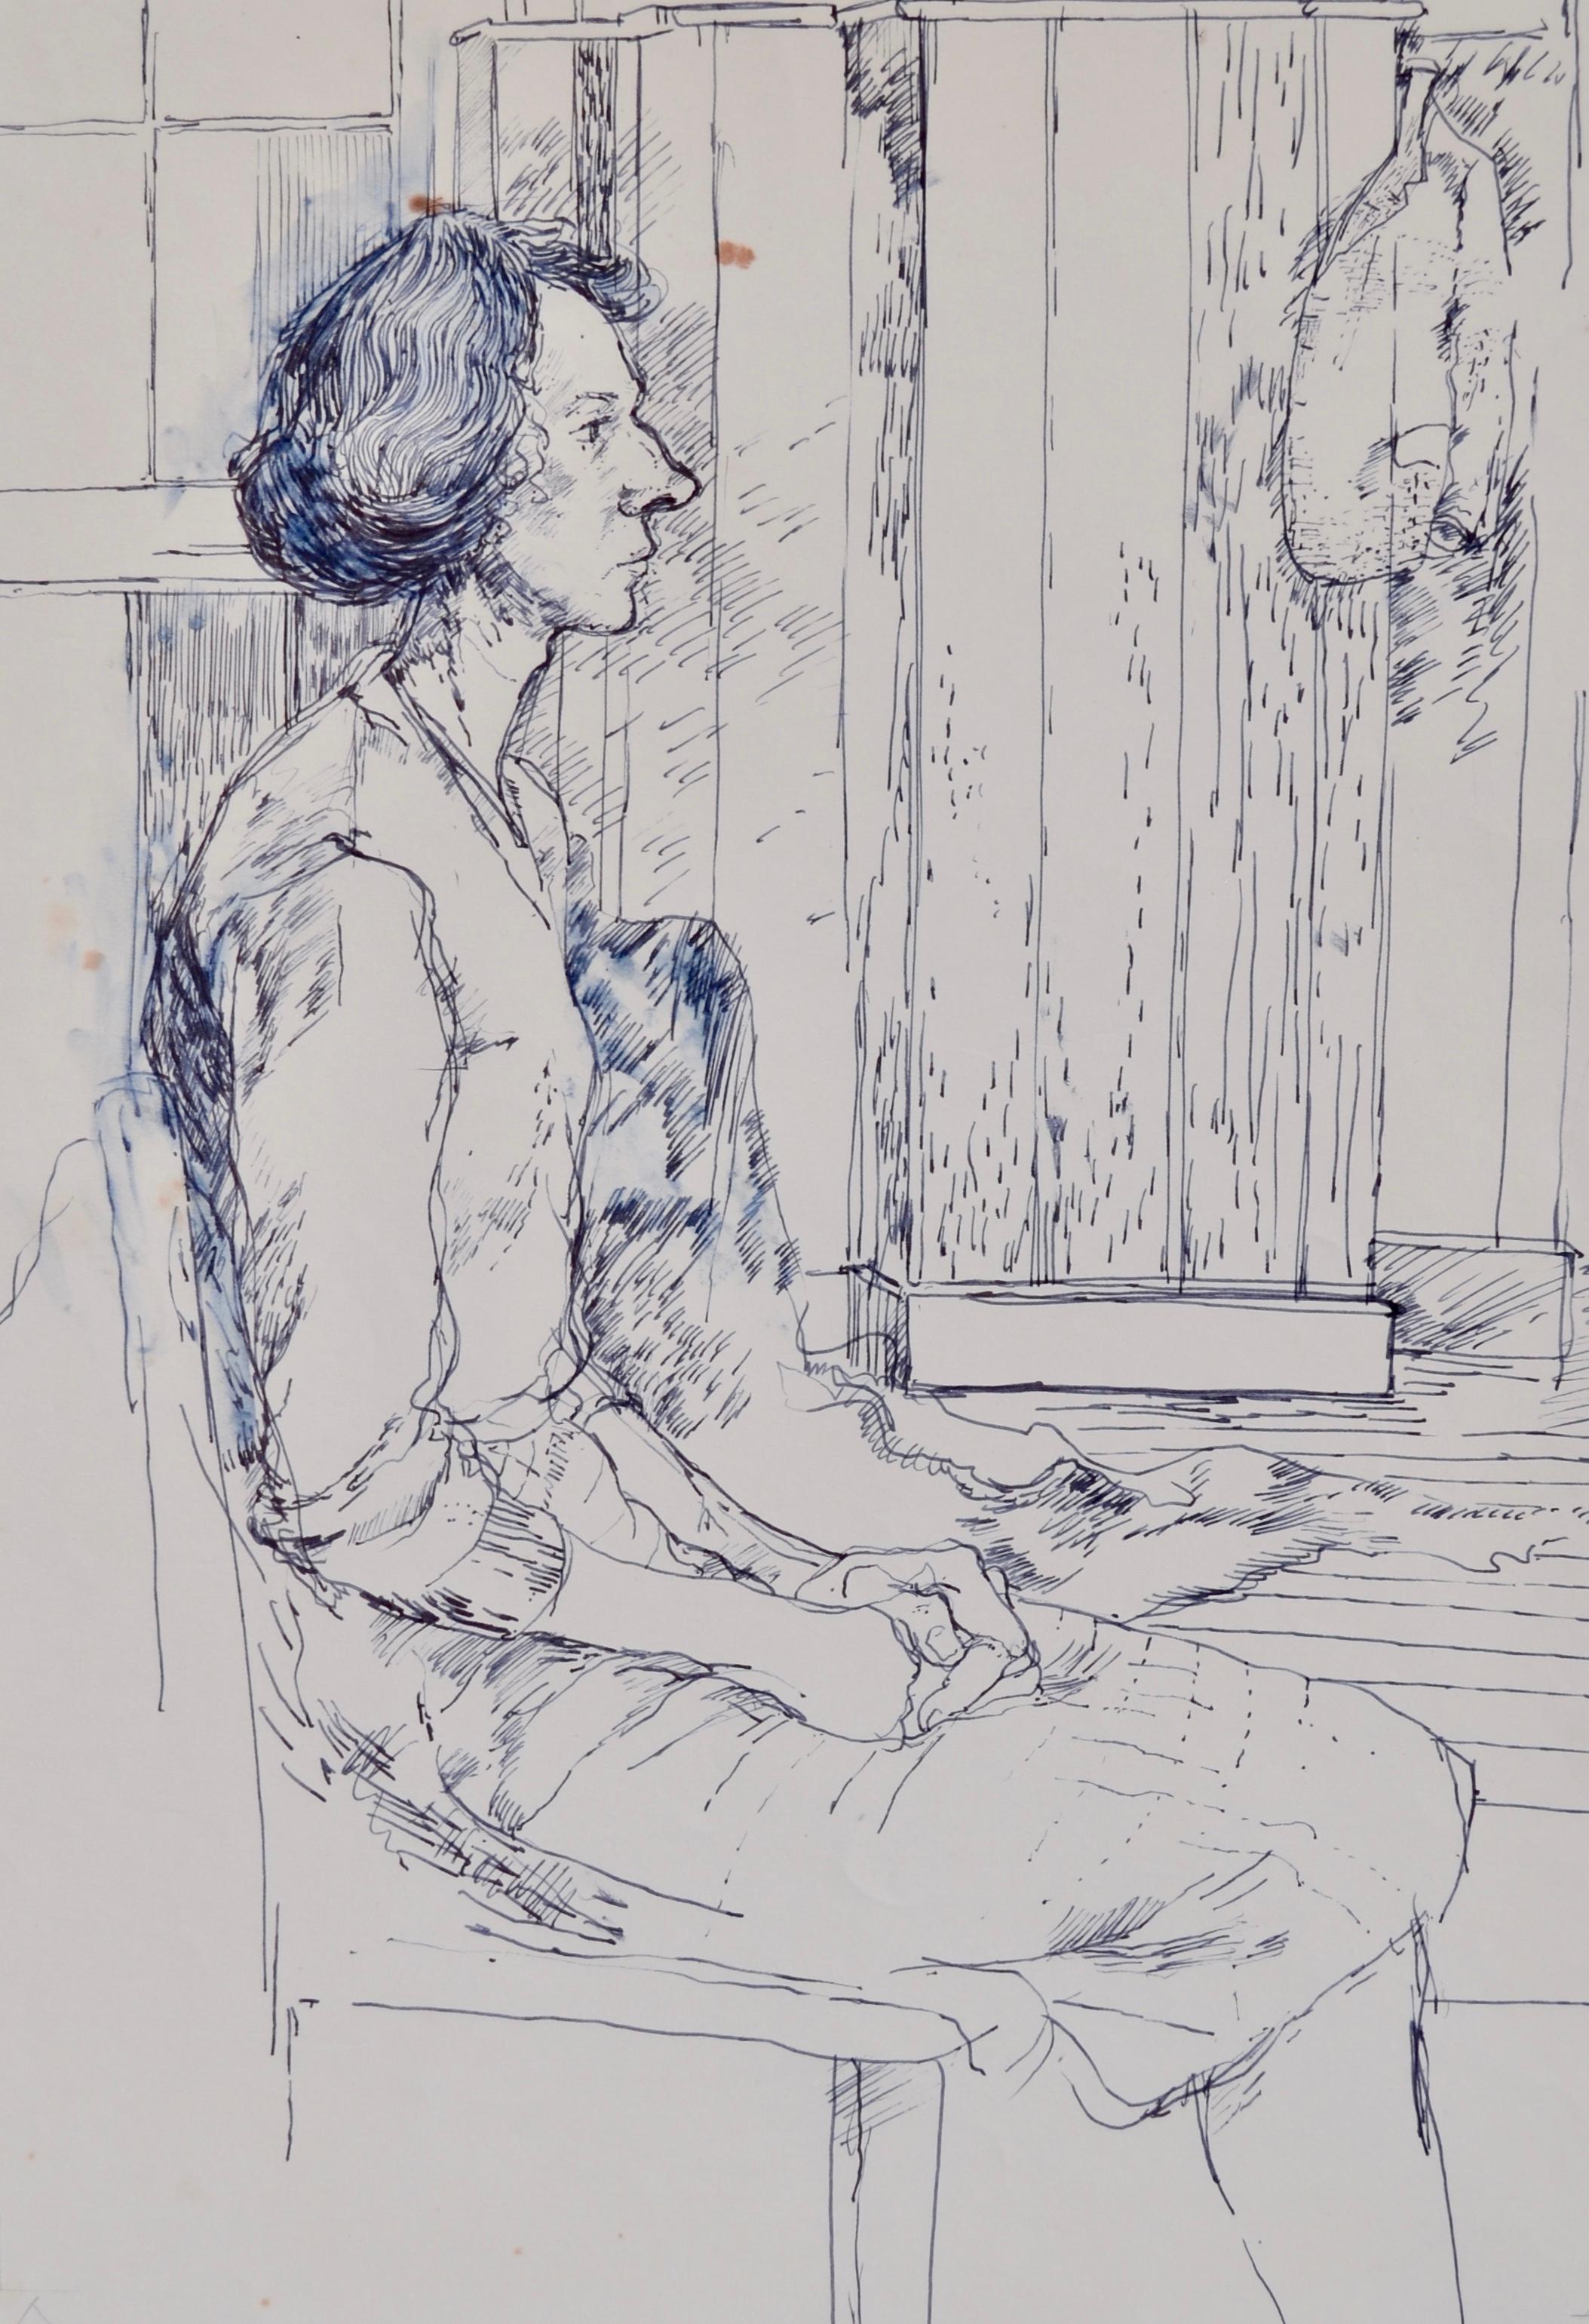 20th Century Modern British drawing of a Seated Woman by Carolyn Sergeant